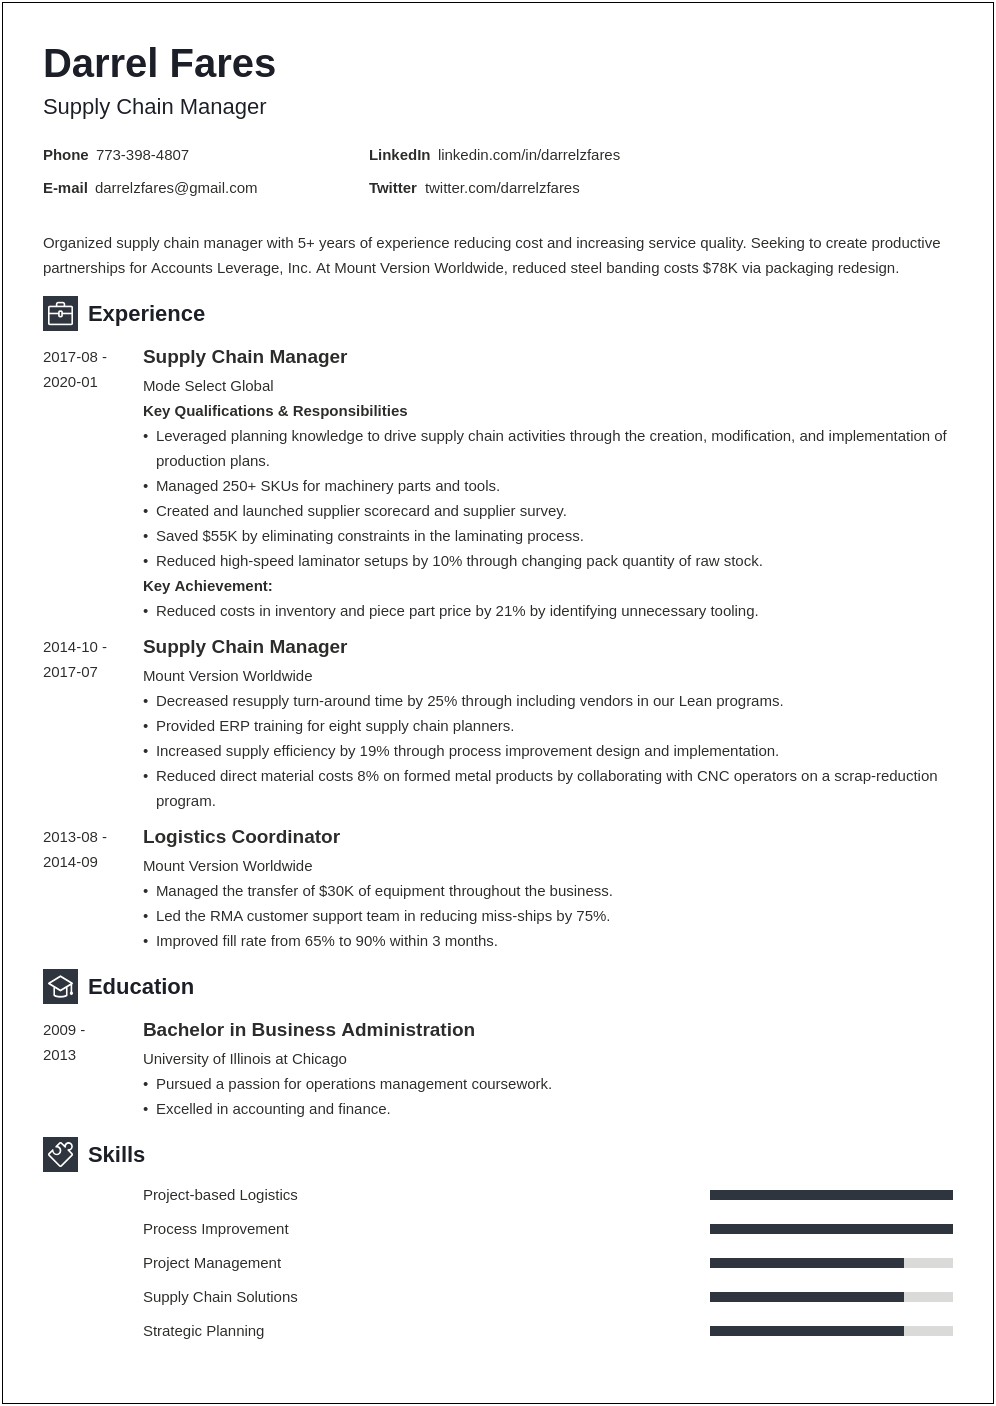 Best Supply Chain Resume Templates For Expereiced Professionals